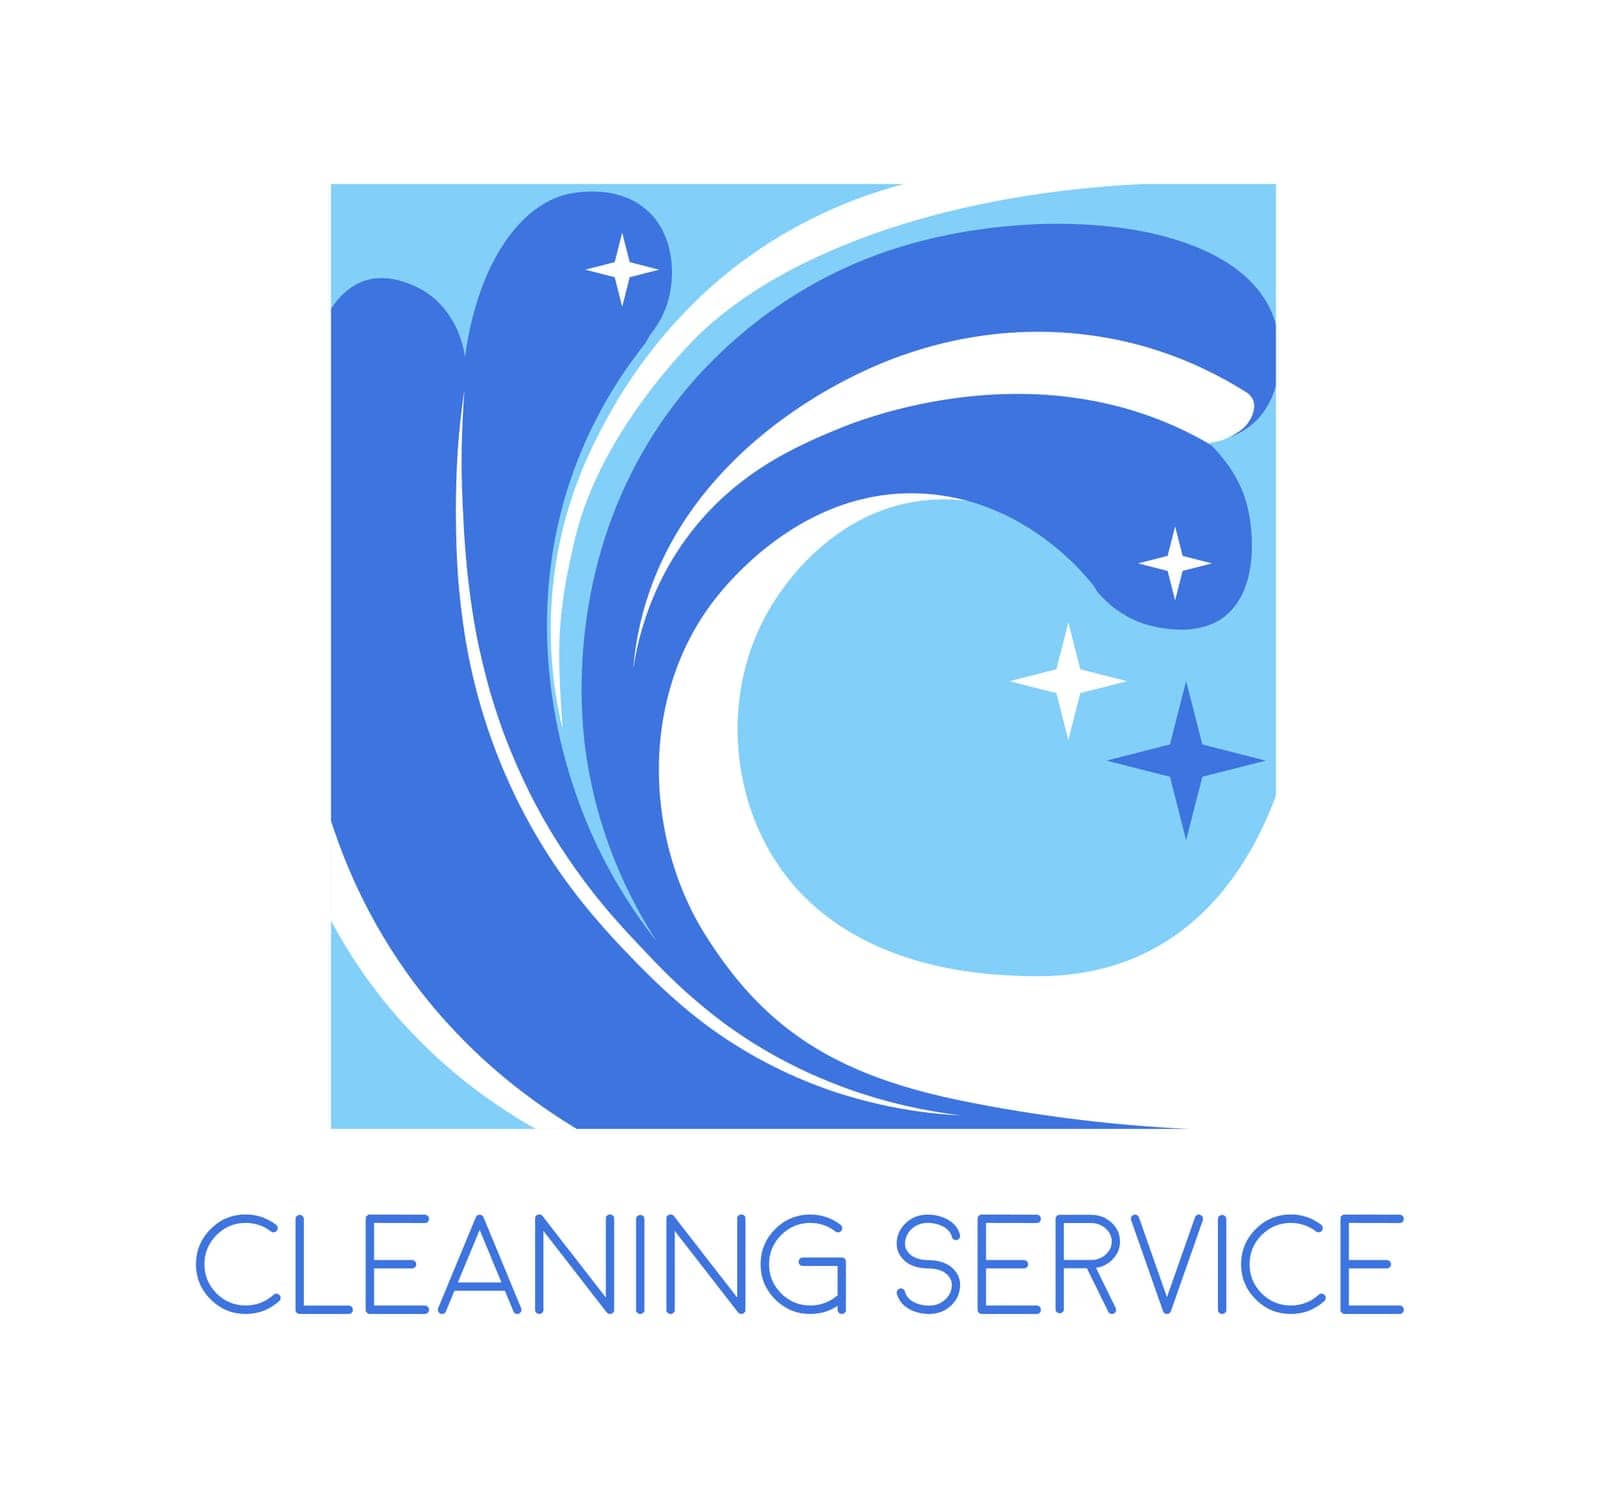 Cleaning service, household maintenance logotype by Sonulkaster